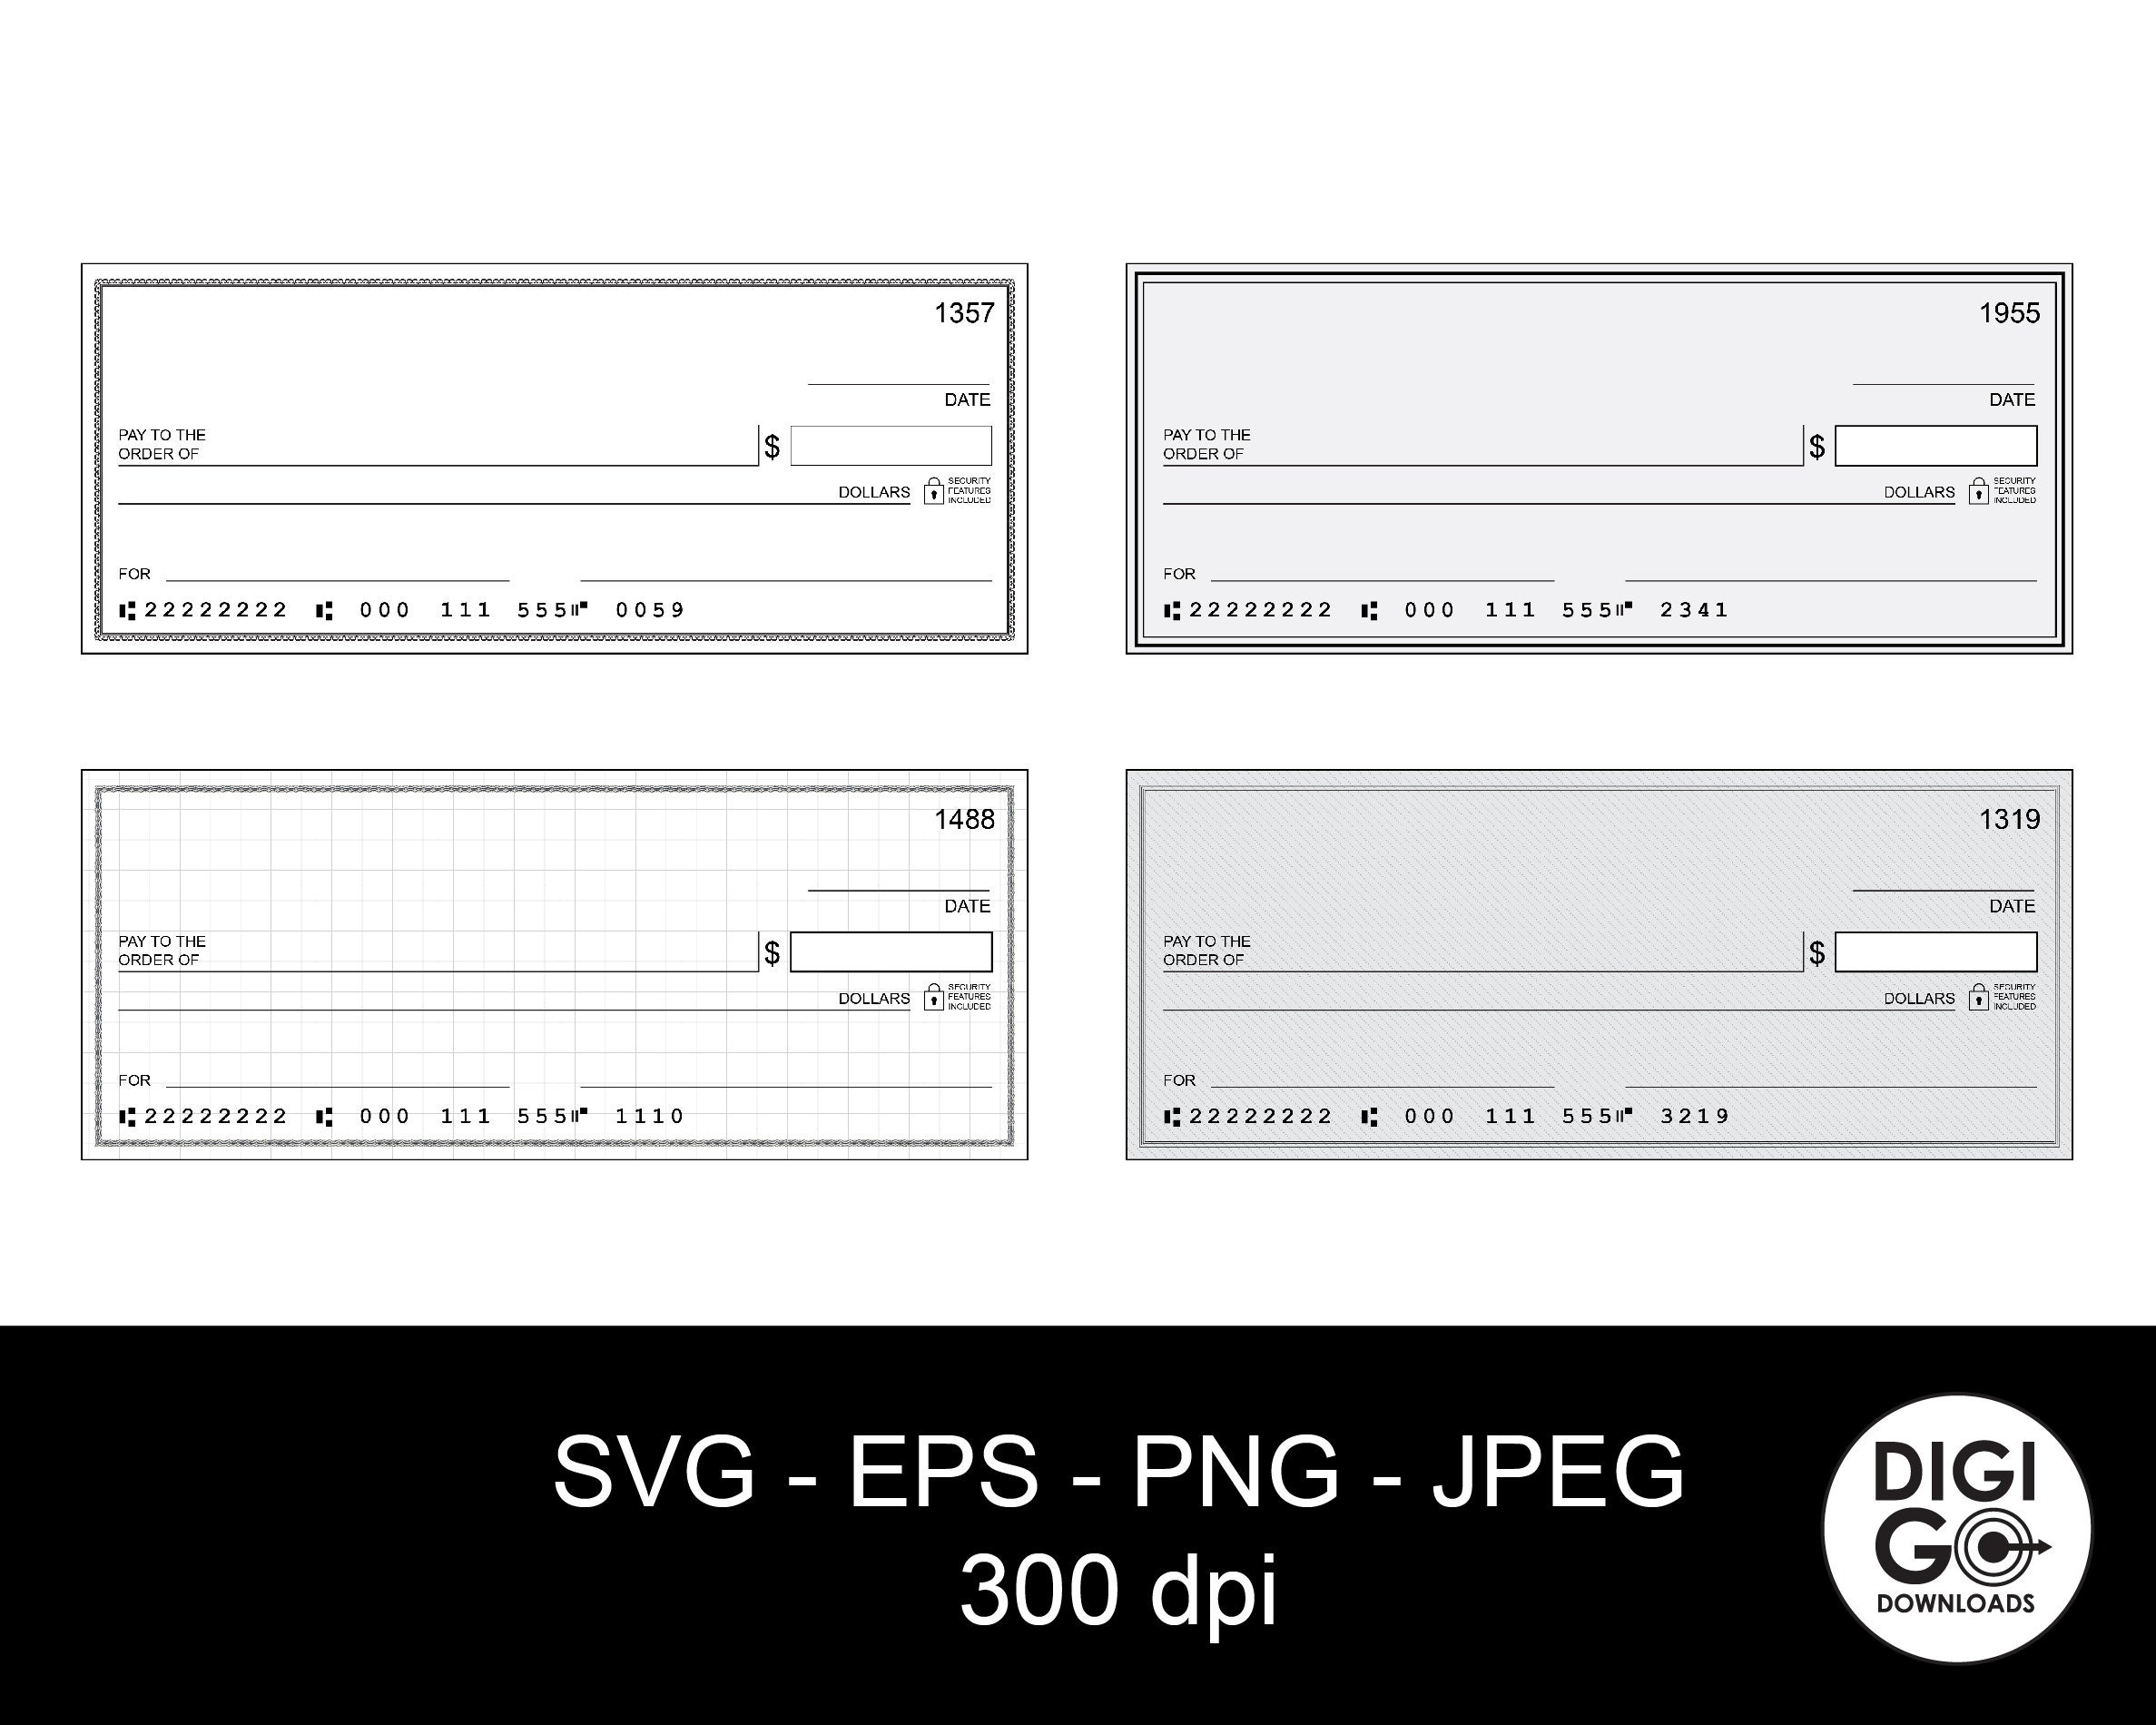 28+ Blank Check Template - DOC, PSD, PDF & Vector Formats